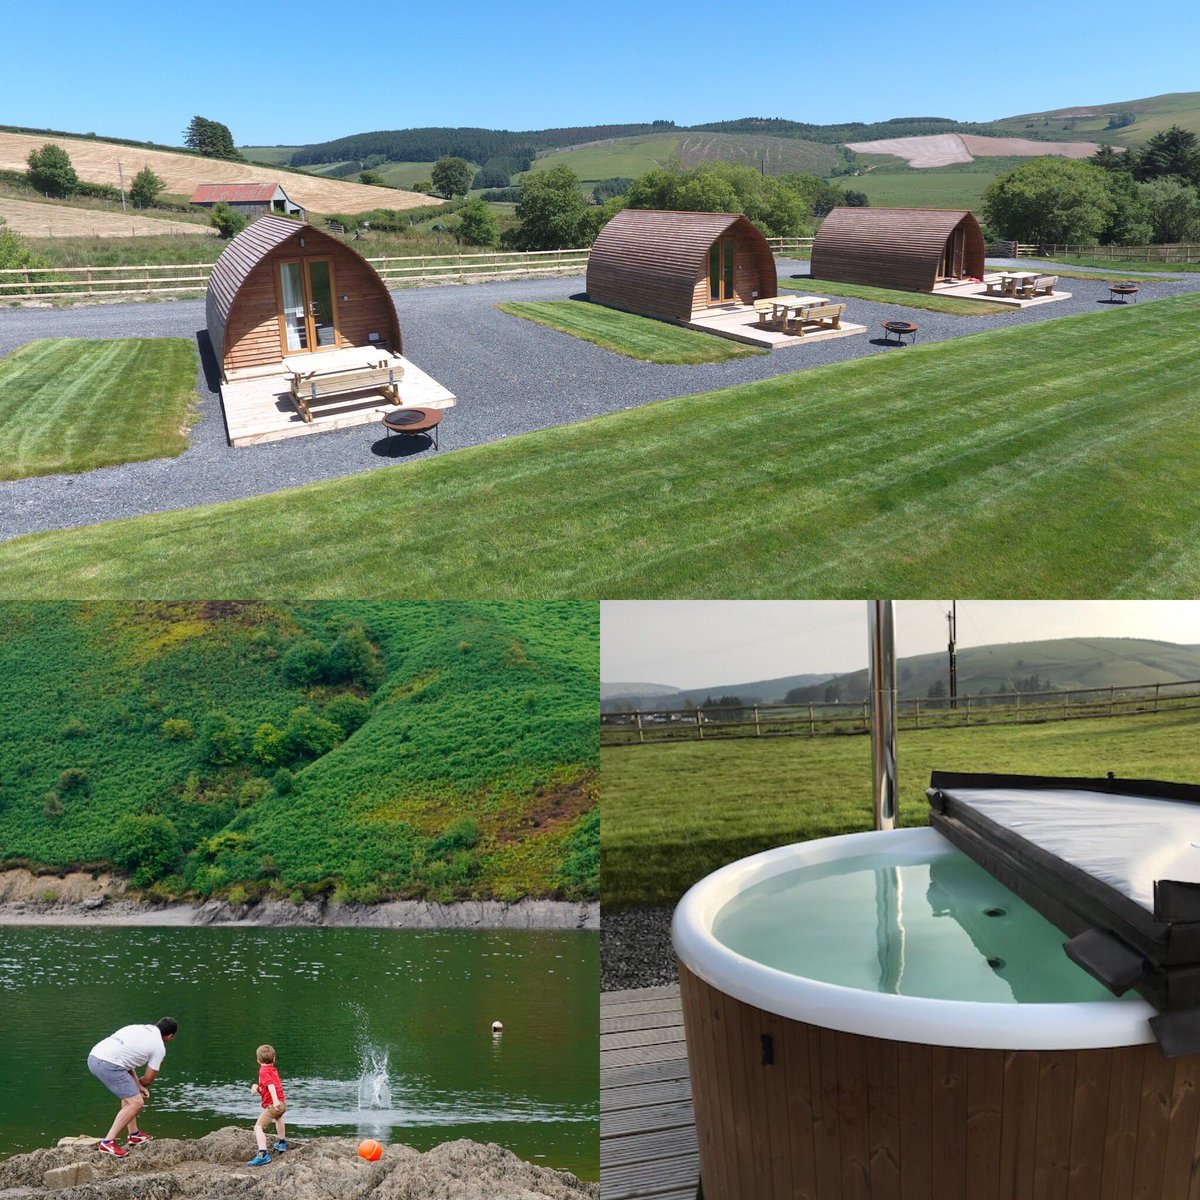 We are in for a proper #heatwave @VisitCambMtns @VisitMidWales busy preparing hottubs @glampingsites @Glamping_UK